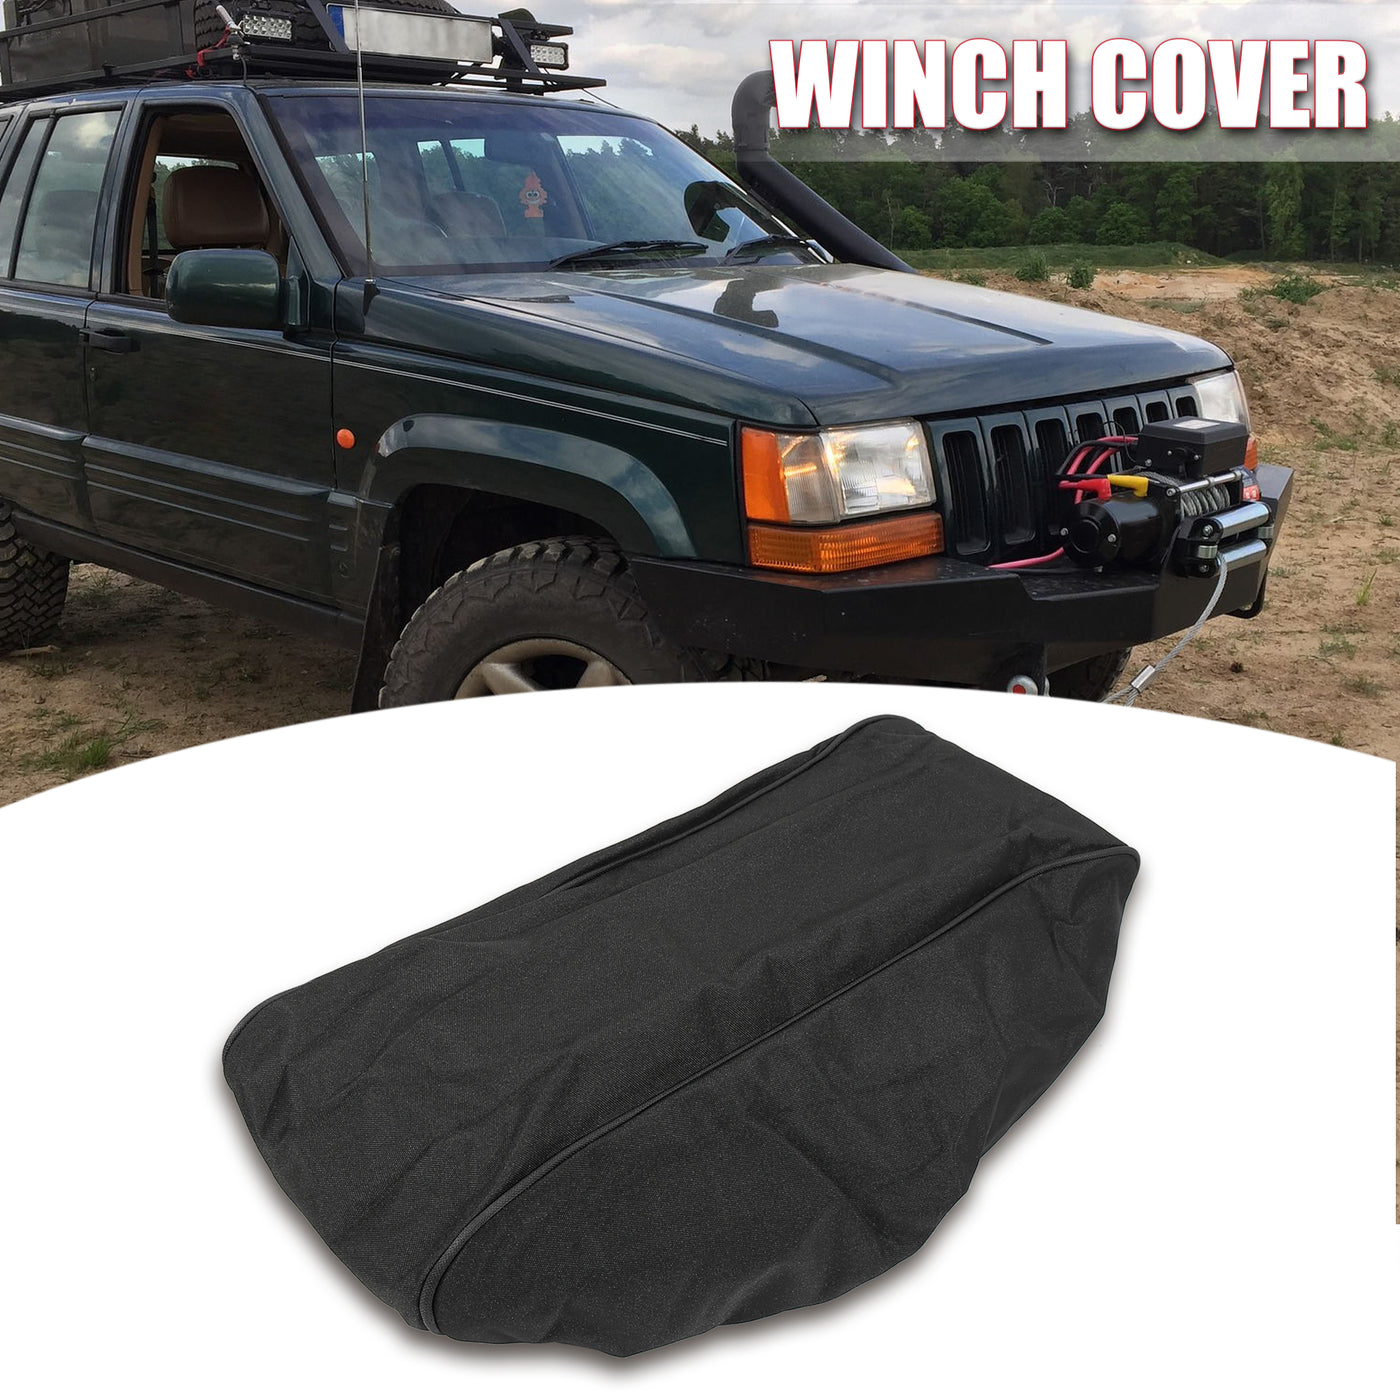 X AUTOHAUX Universal 600D Winch Cover Waterproof Dustproof Protection 19.69"x7.87"x8.66" Fit for 8500-17500 Lbs Electric Winches Black Edge